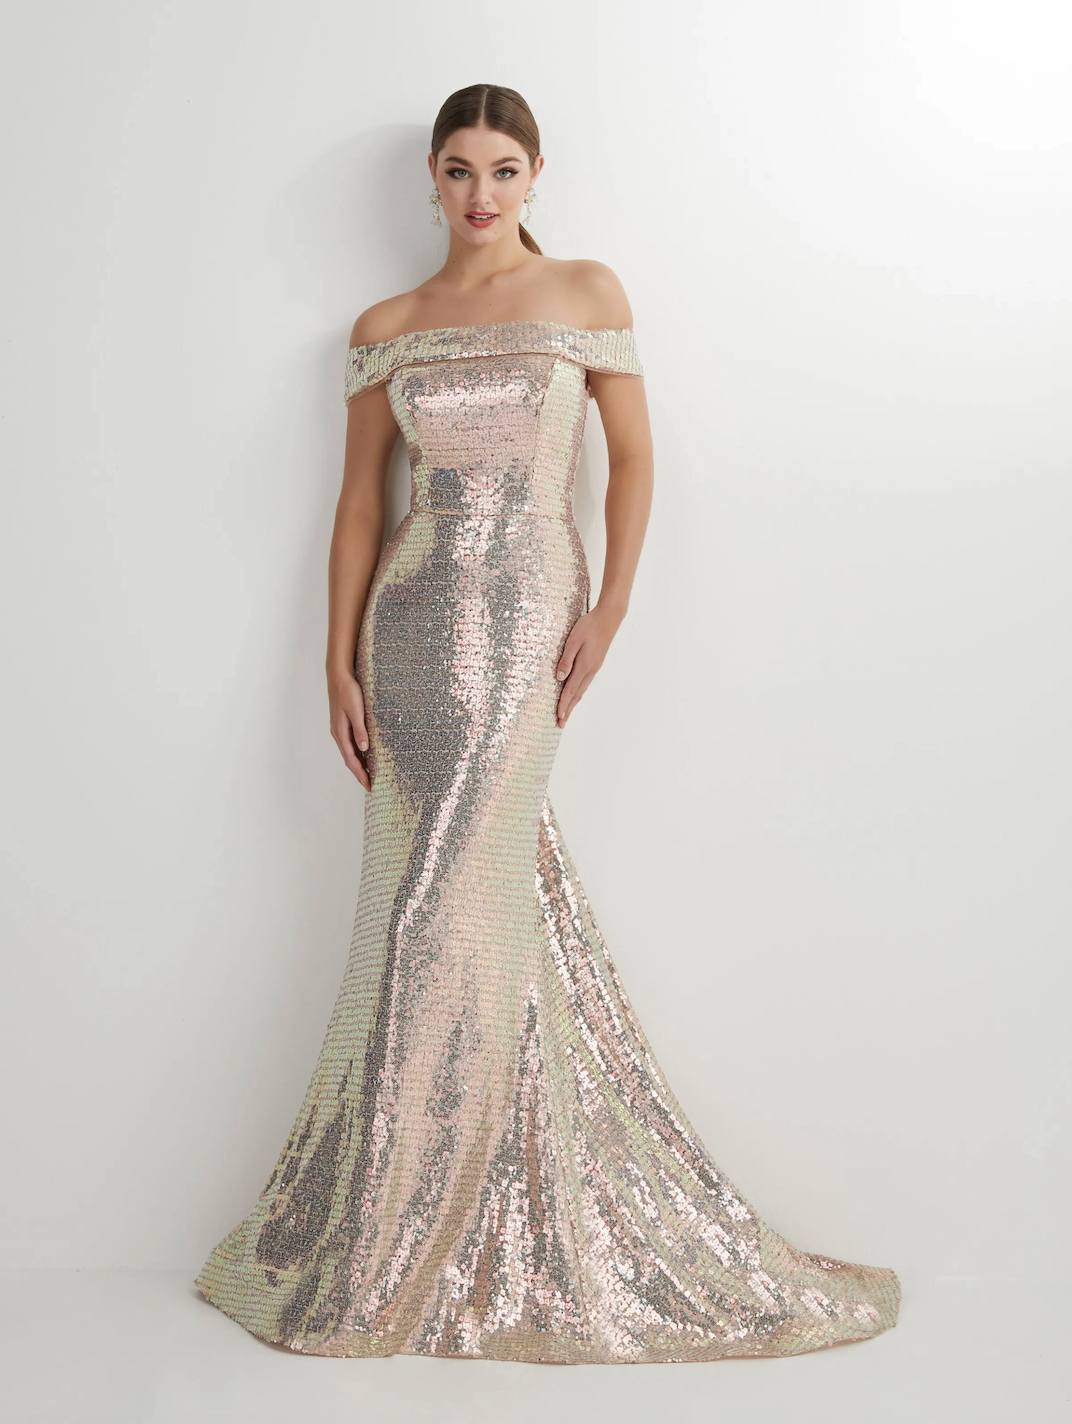 Unique 2023 Prom Dresses: Stand Out at Prom Image